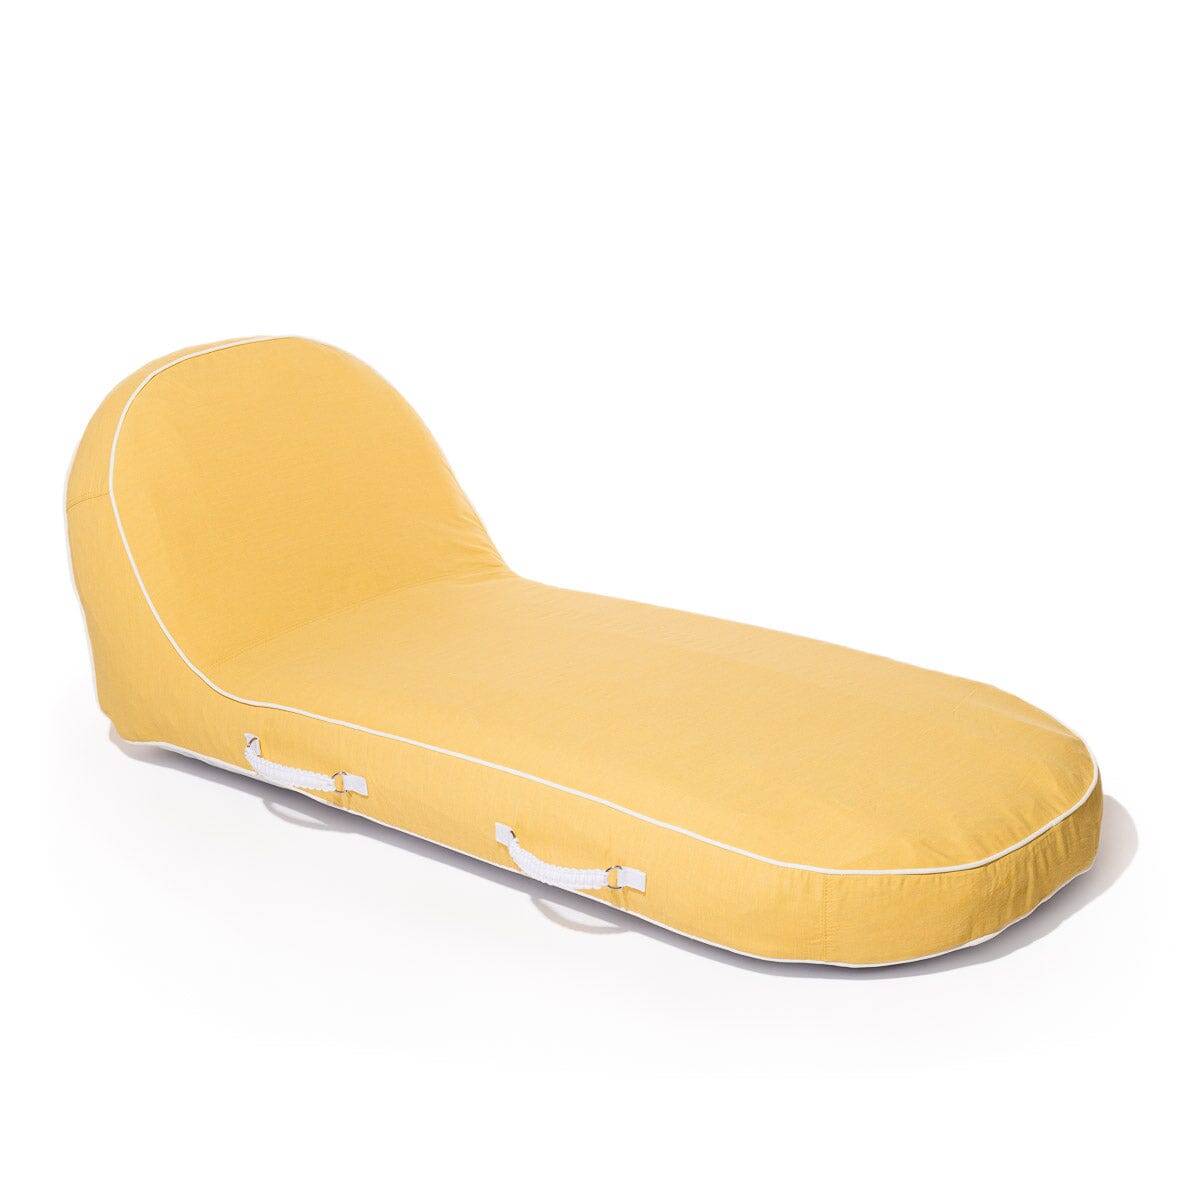 The Pool Lounger - Rivie Mimosa Pool Lounger Business & Pleasure Co. 